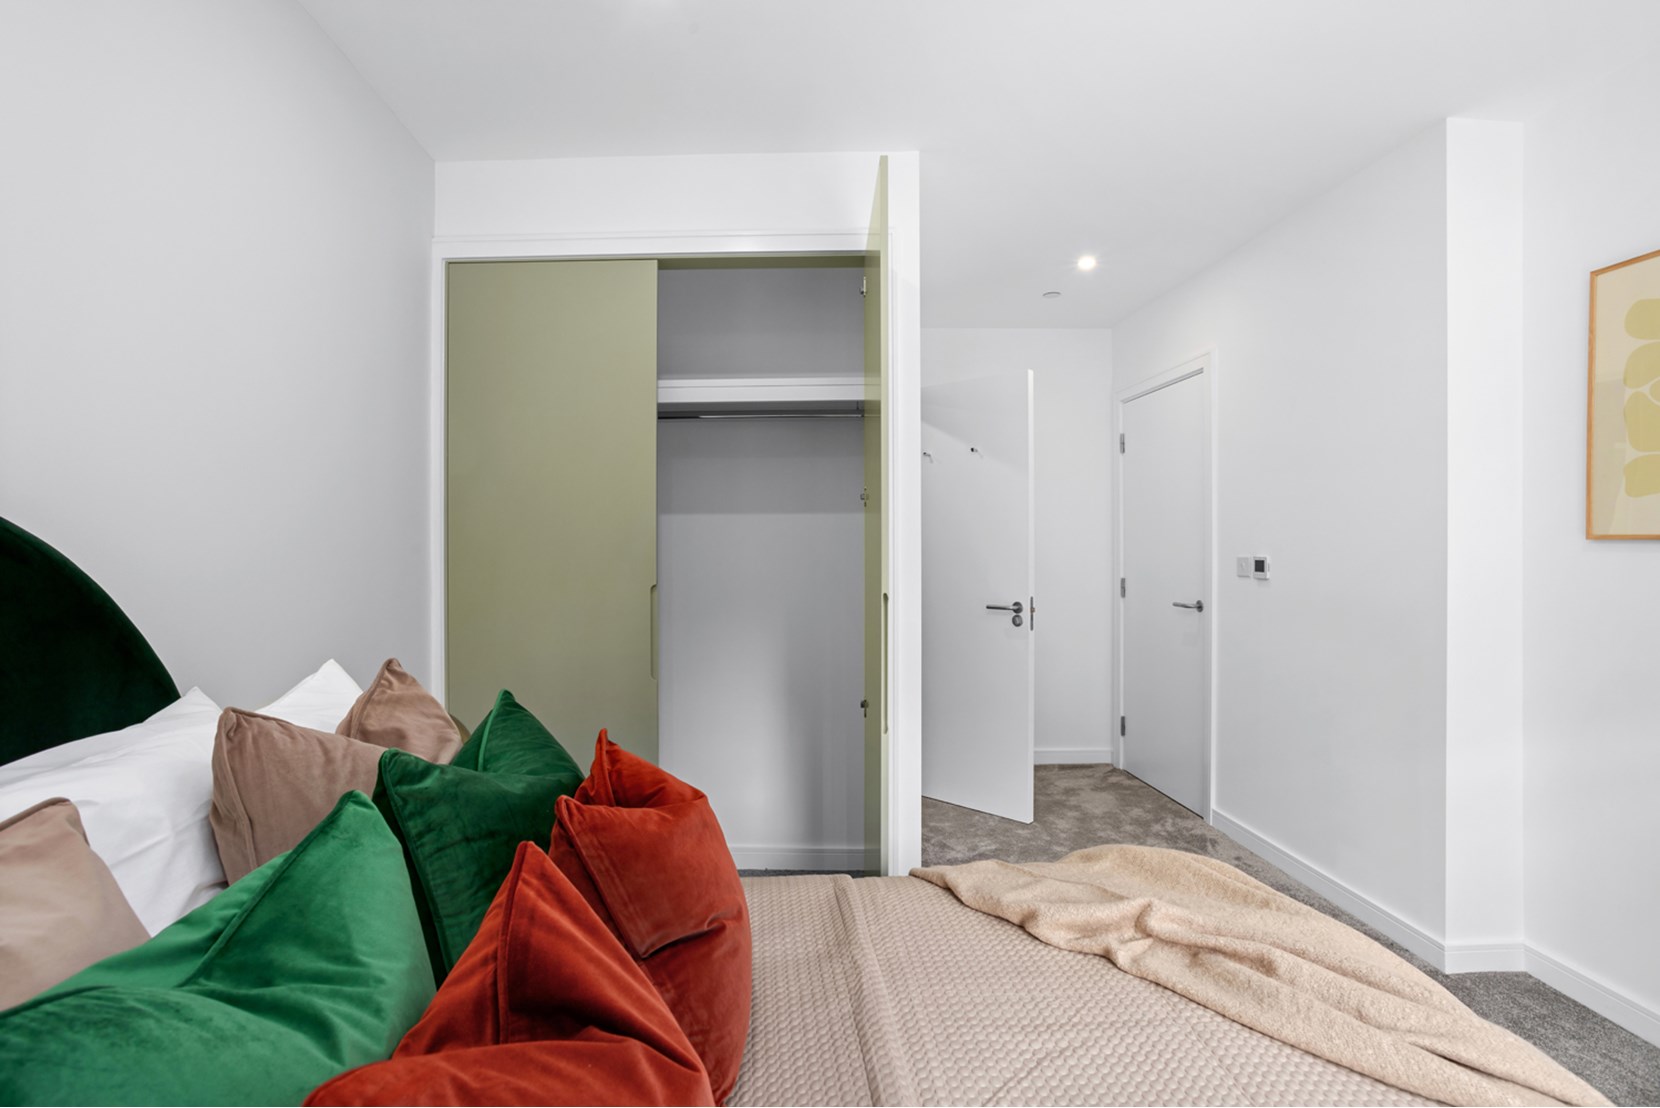 Apartments to Rent by Populo Living at Plaistow Hub, Newham, E13, bedroom